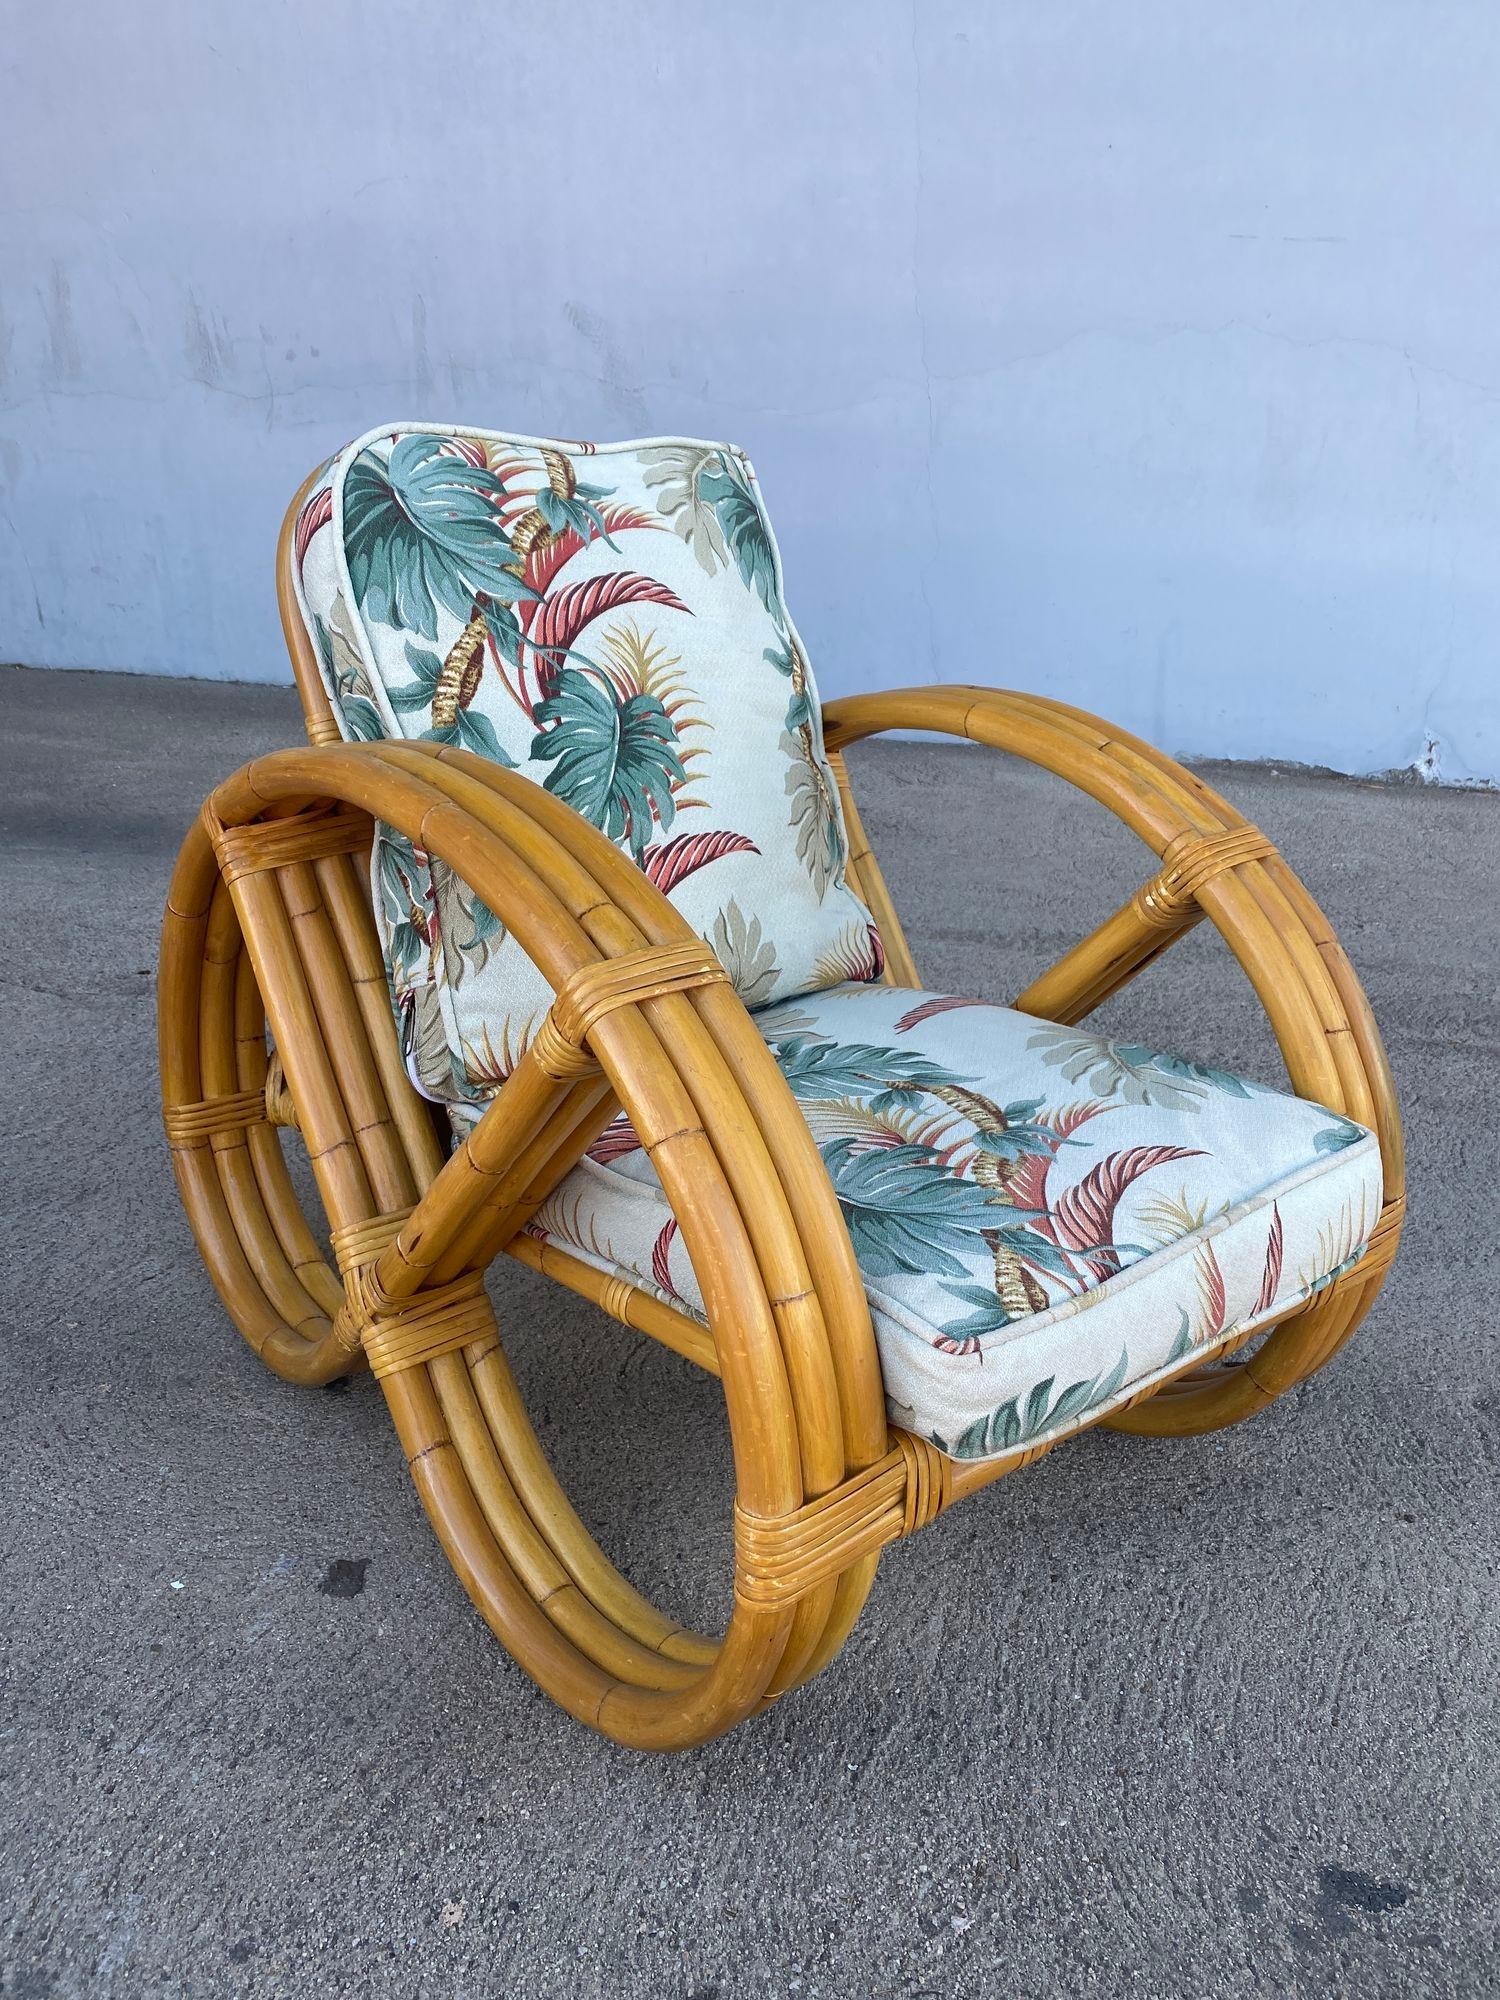 Rare 3-Strand Child Size Round Full Pretzel Rattan Sofa & Lounge Chair Set In Excellent Condition For Sale In Van Nuys, CA